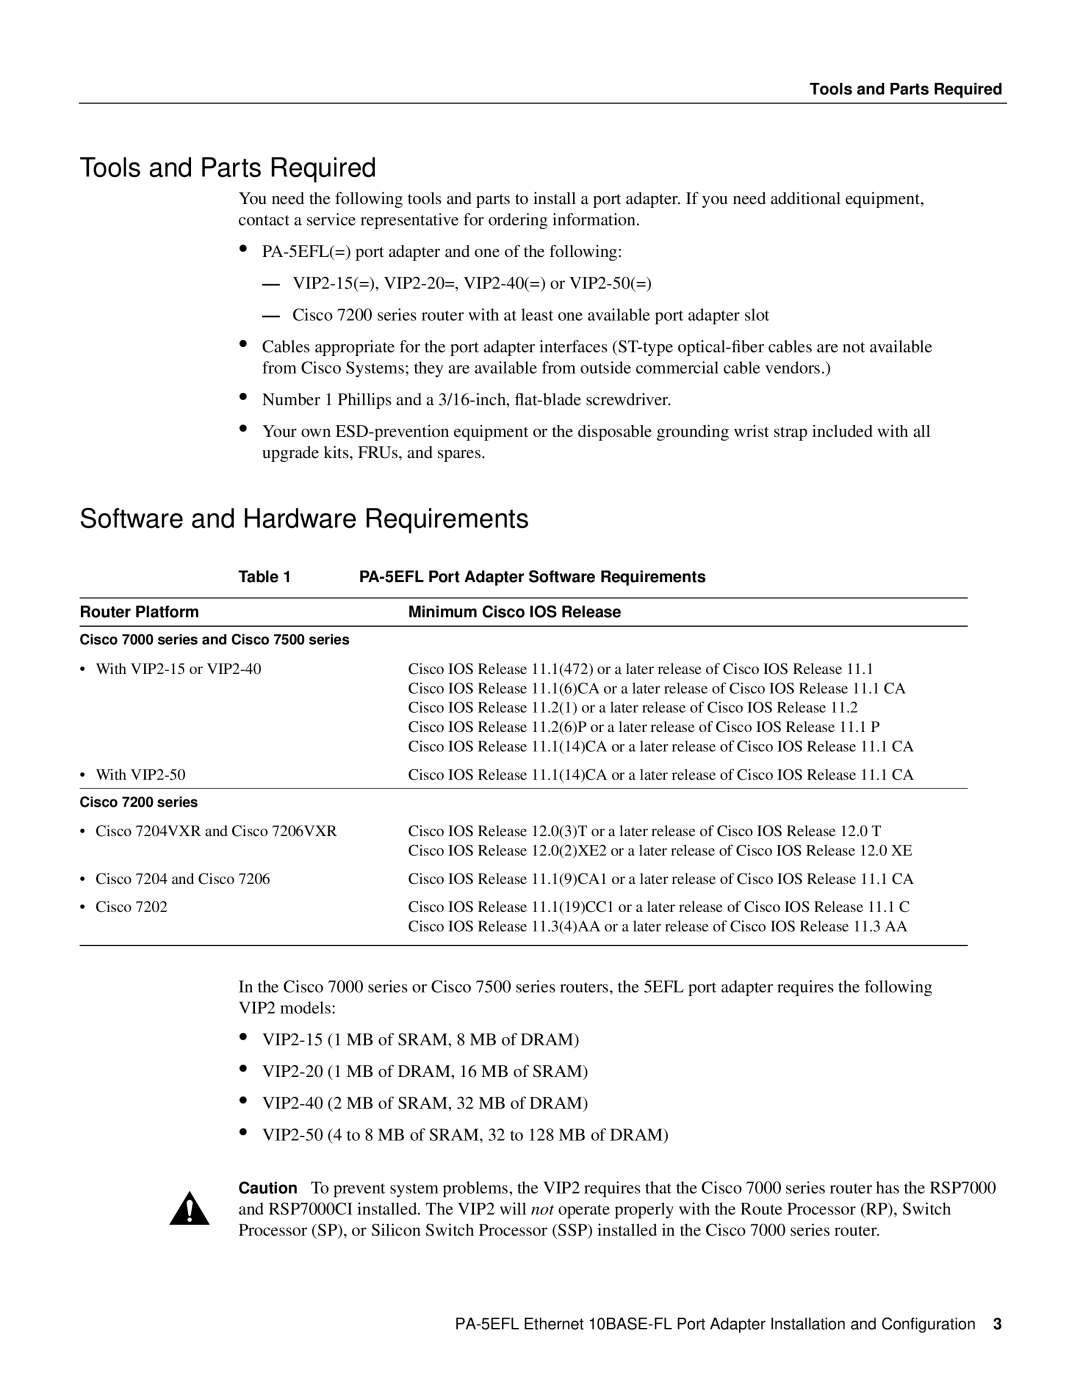 Cisco Systems 10BASE-FL, PA-5EFL= manual Tools and Parts Required, Software and Hardware Requirements 